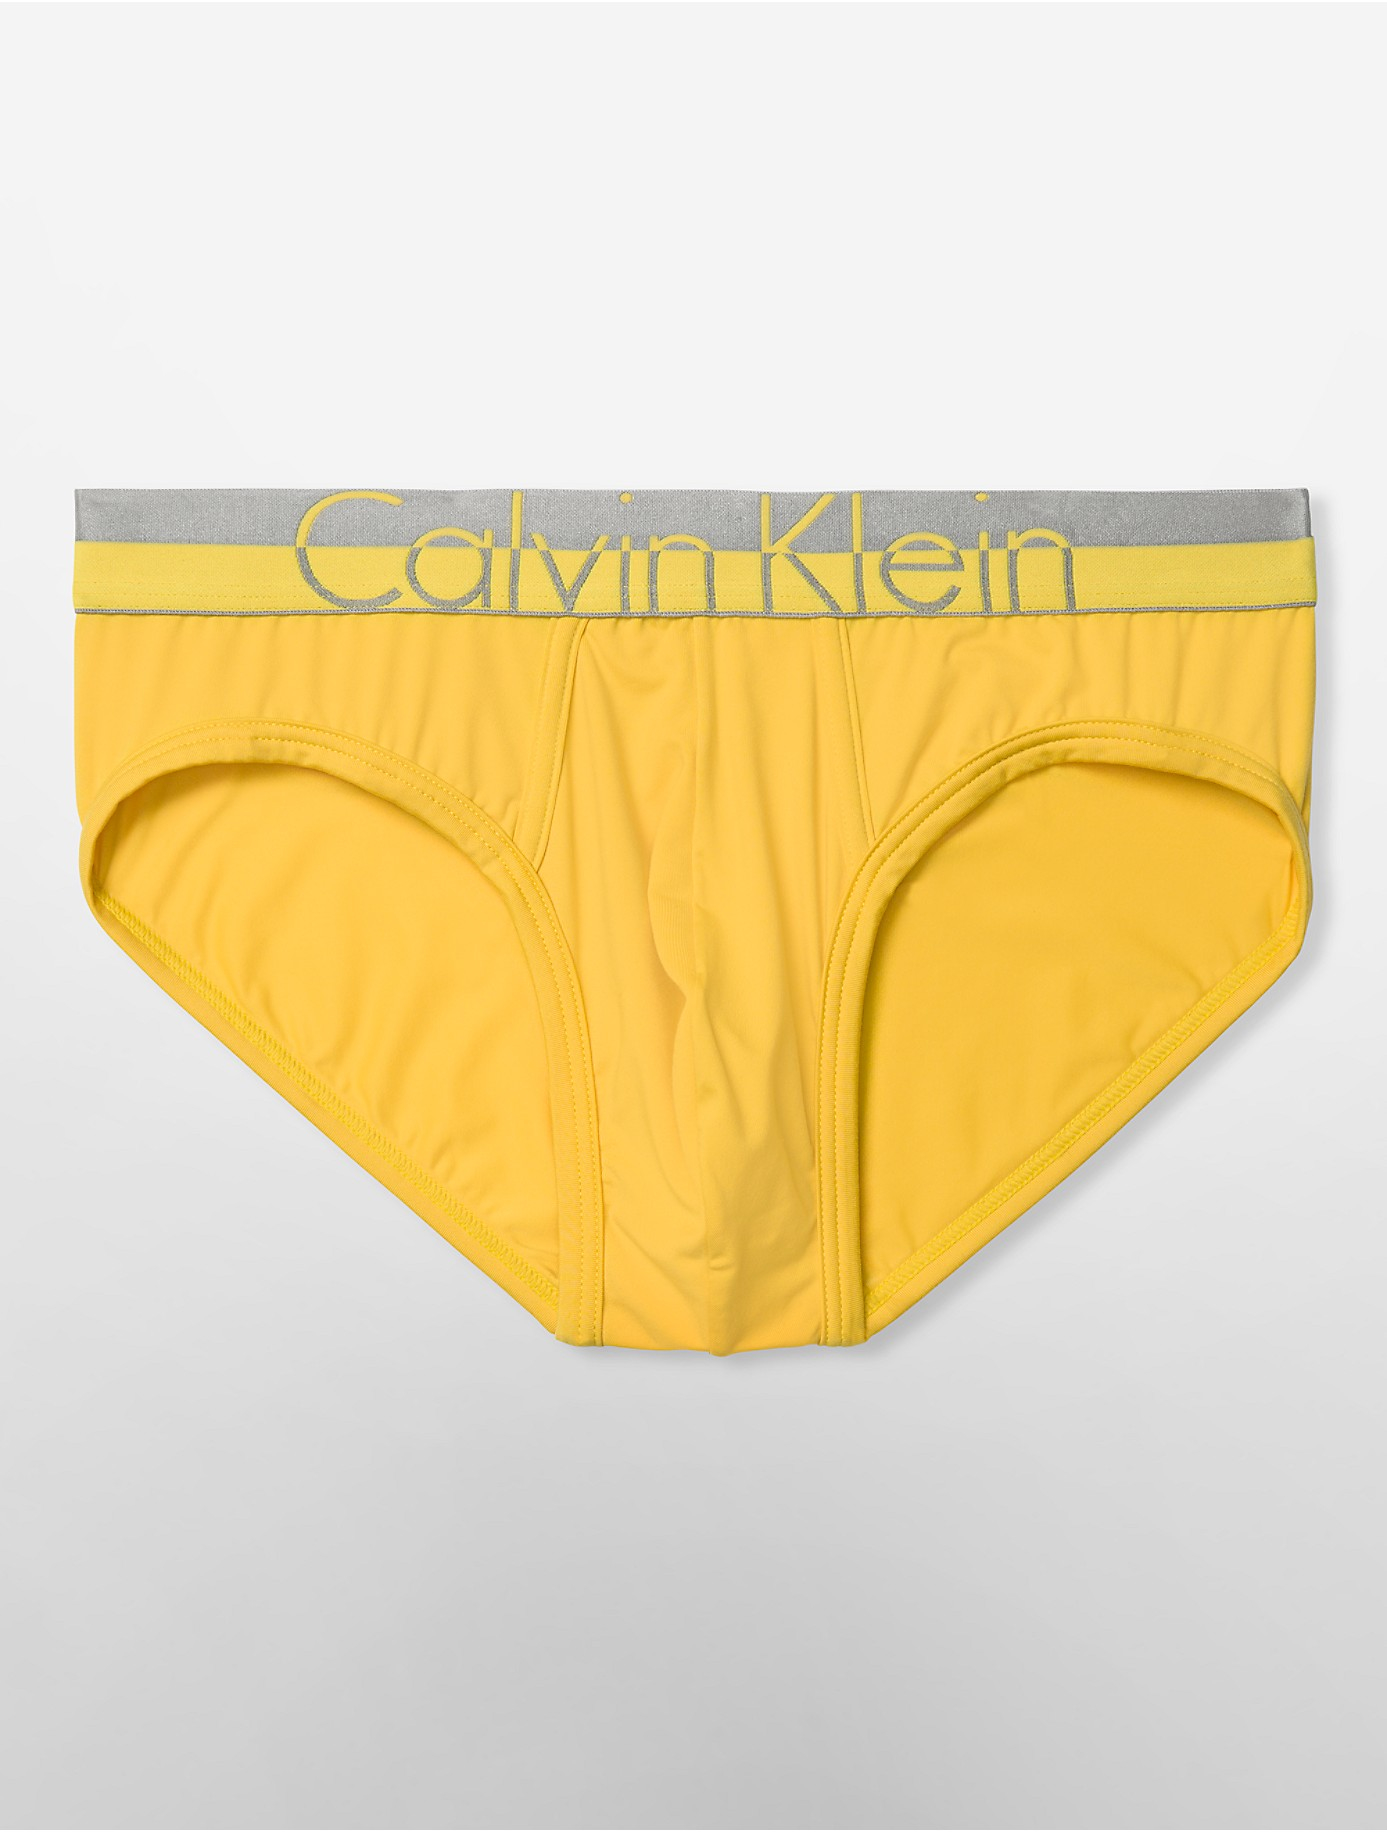 Calvin Klein Underwear Magnetic Force Micro Hip Brief in Light Yellow ( Yellow) for Men - Lyst